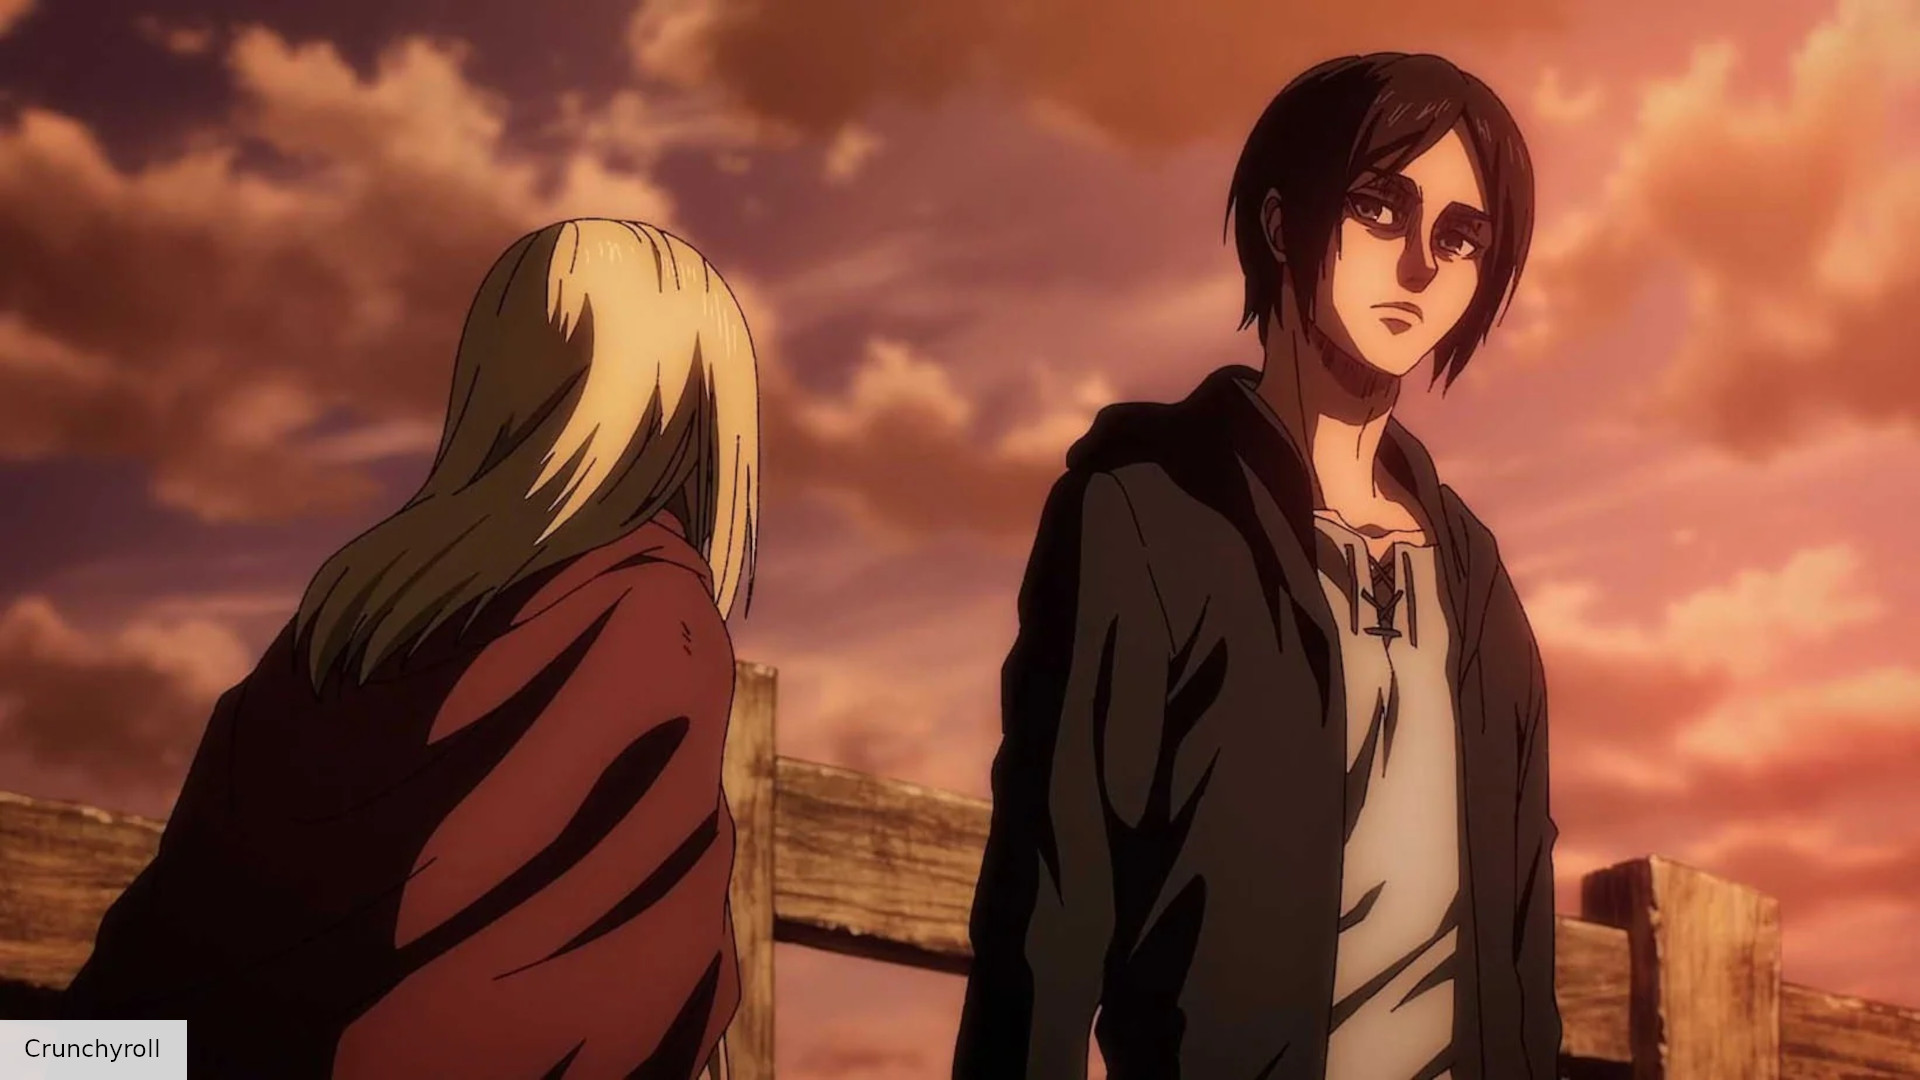 Attack on Titan season 4 part 3 release date speculation and more | The